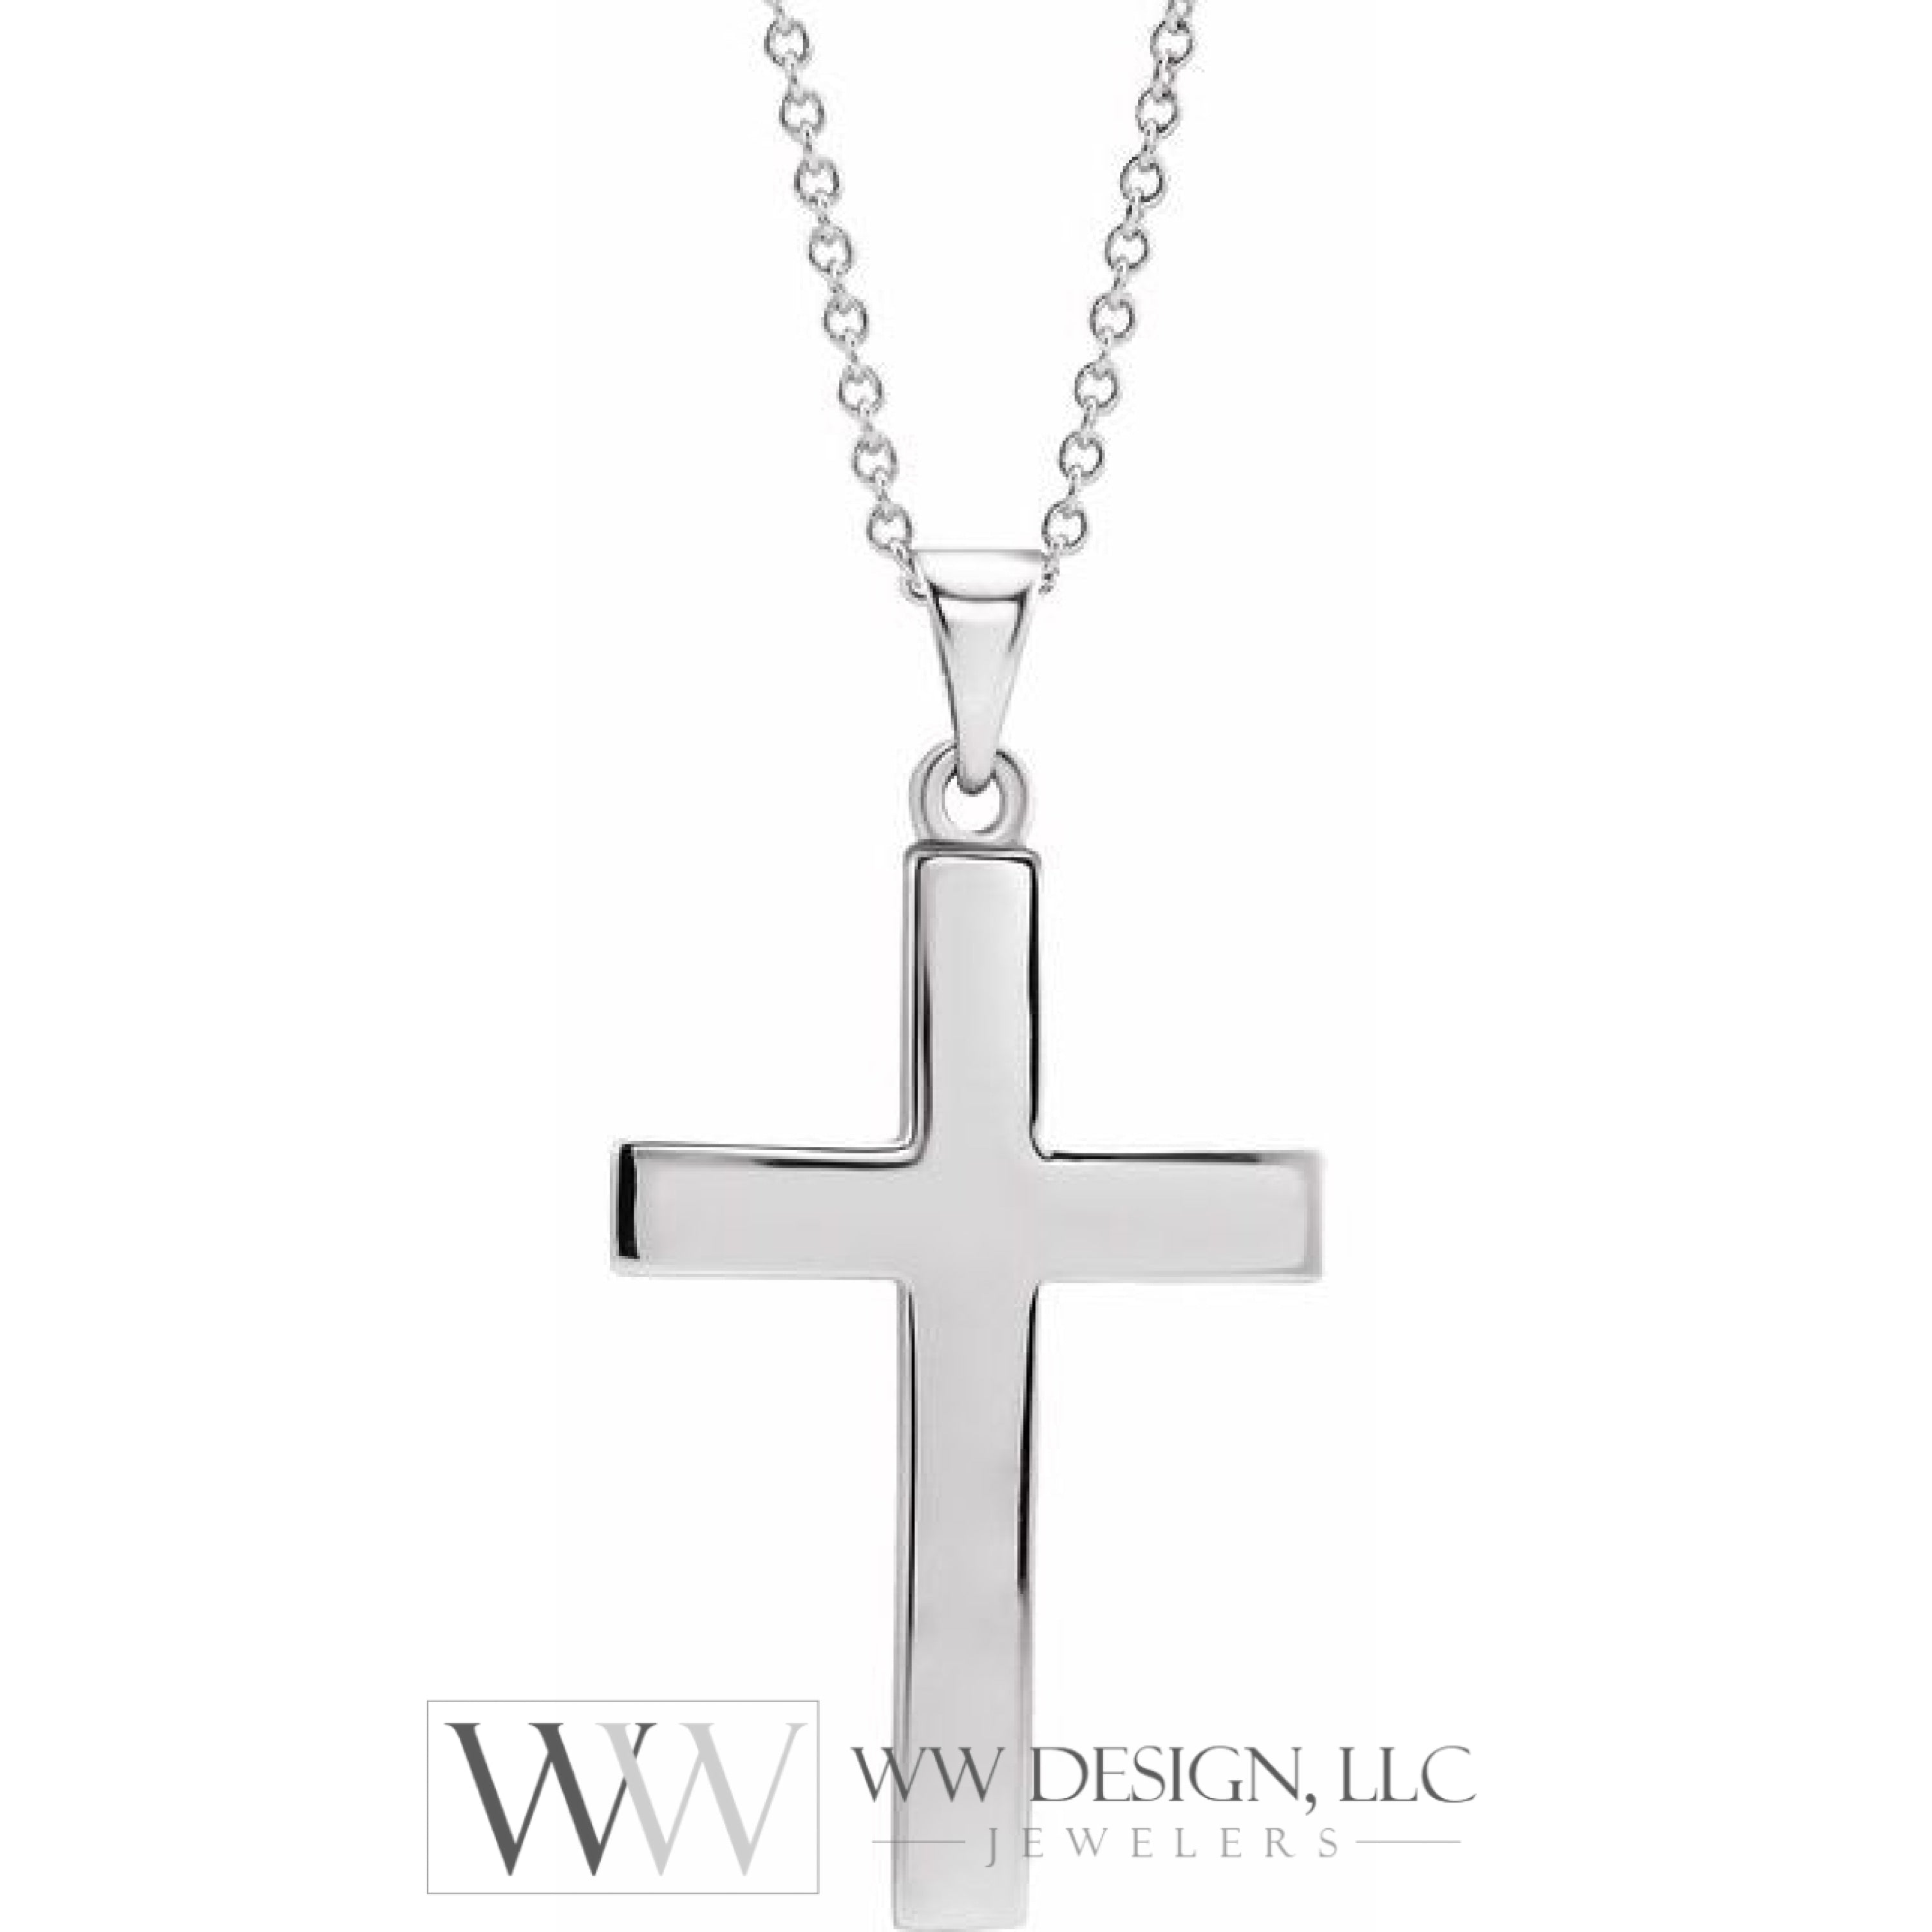 23mm x 15.9mm Cross 18" Necklace - 14K Gold (Y, W, or R), Platinum or Sterling Silver